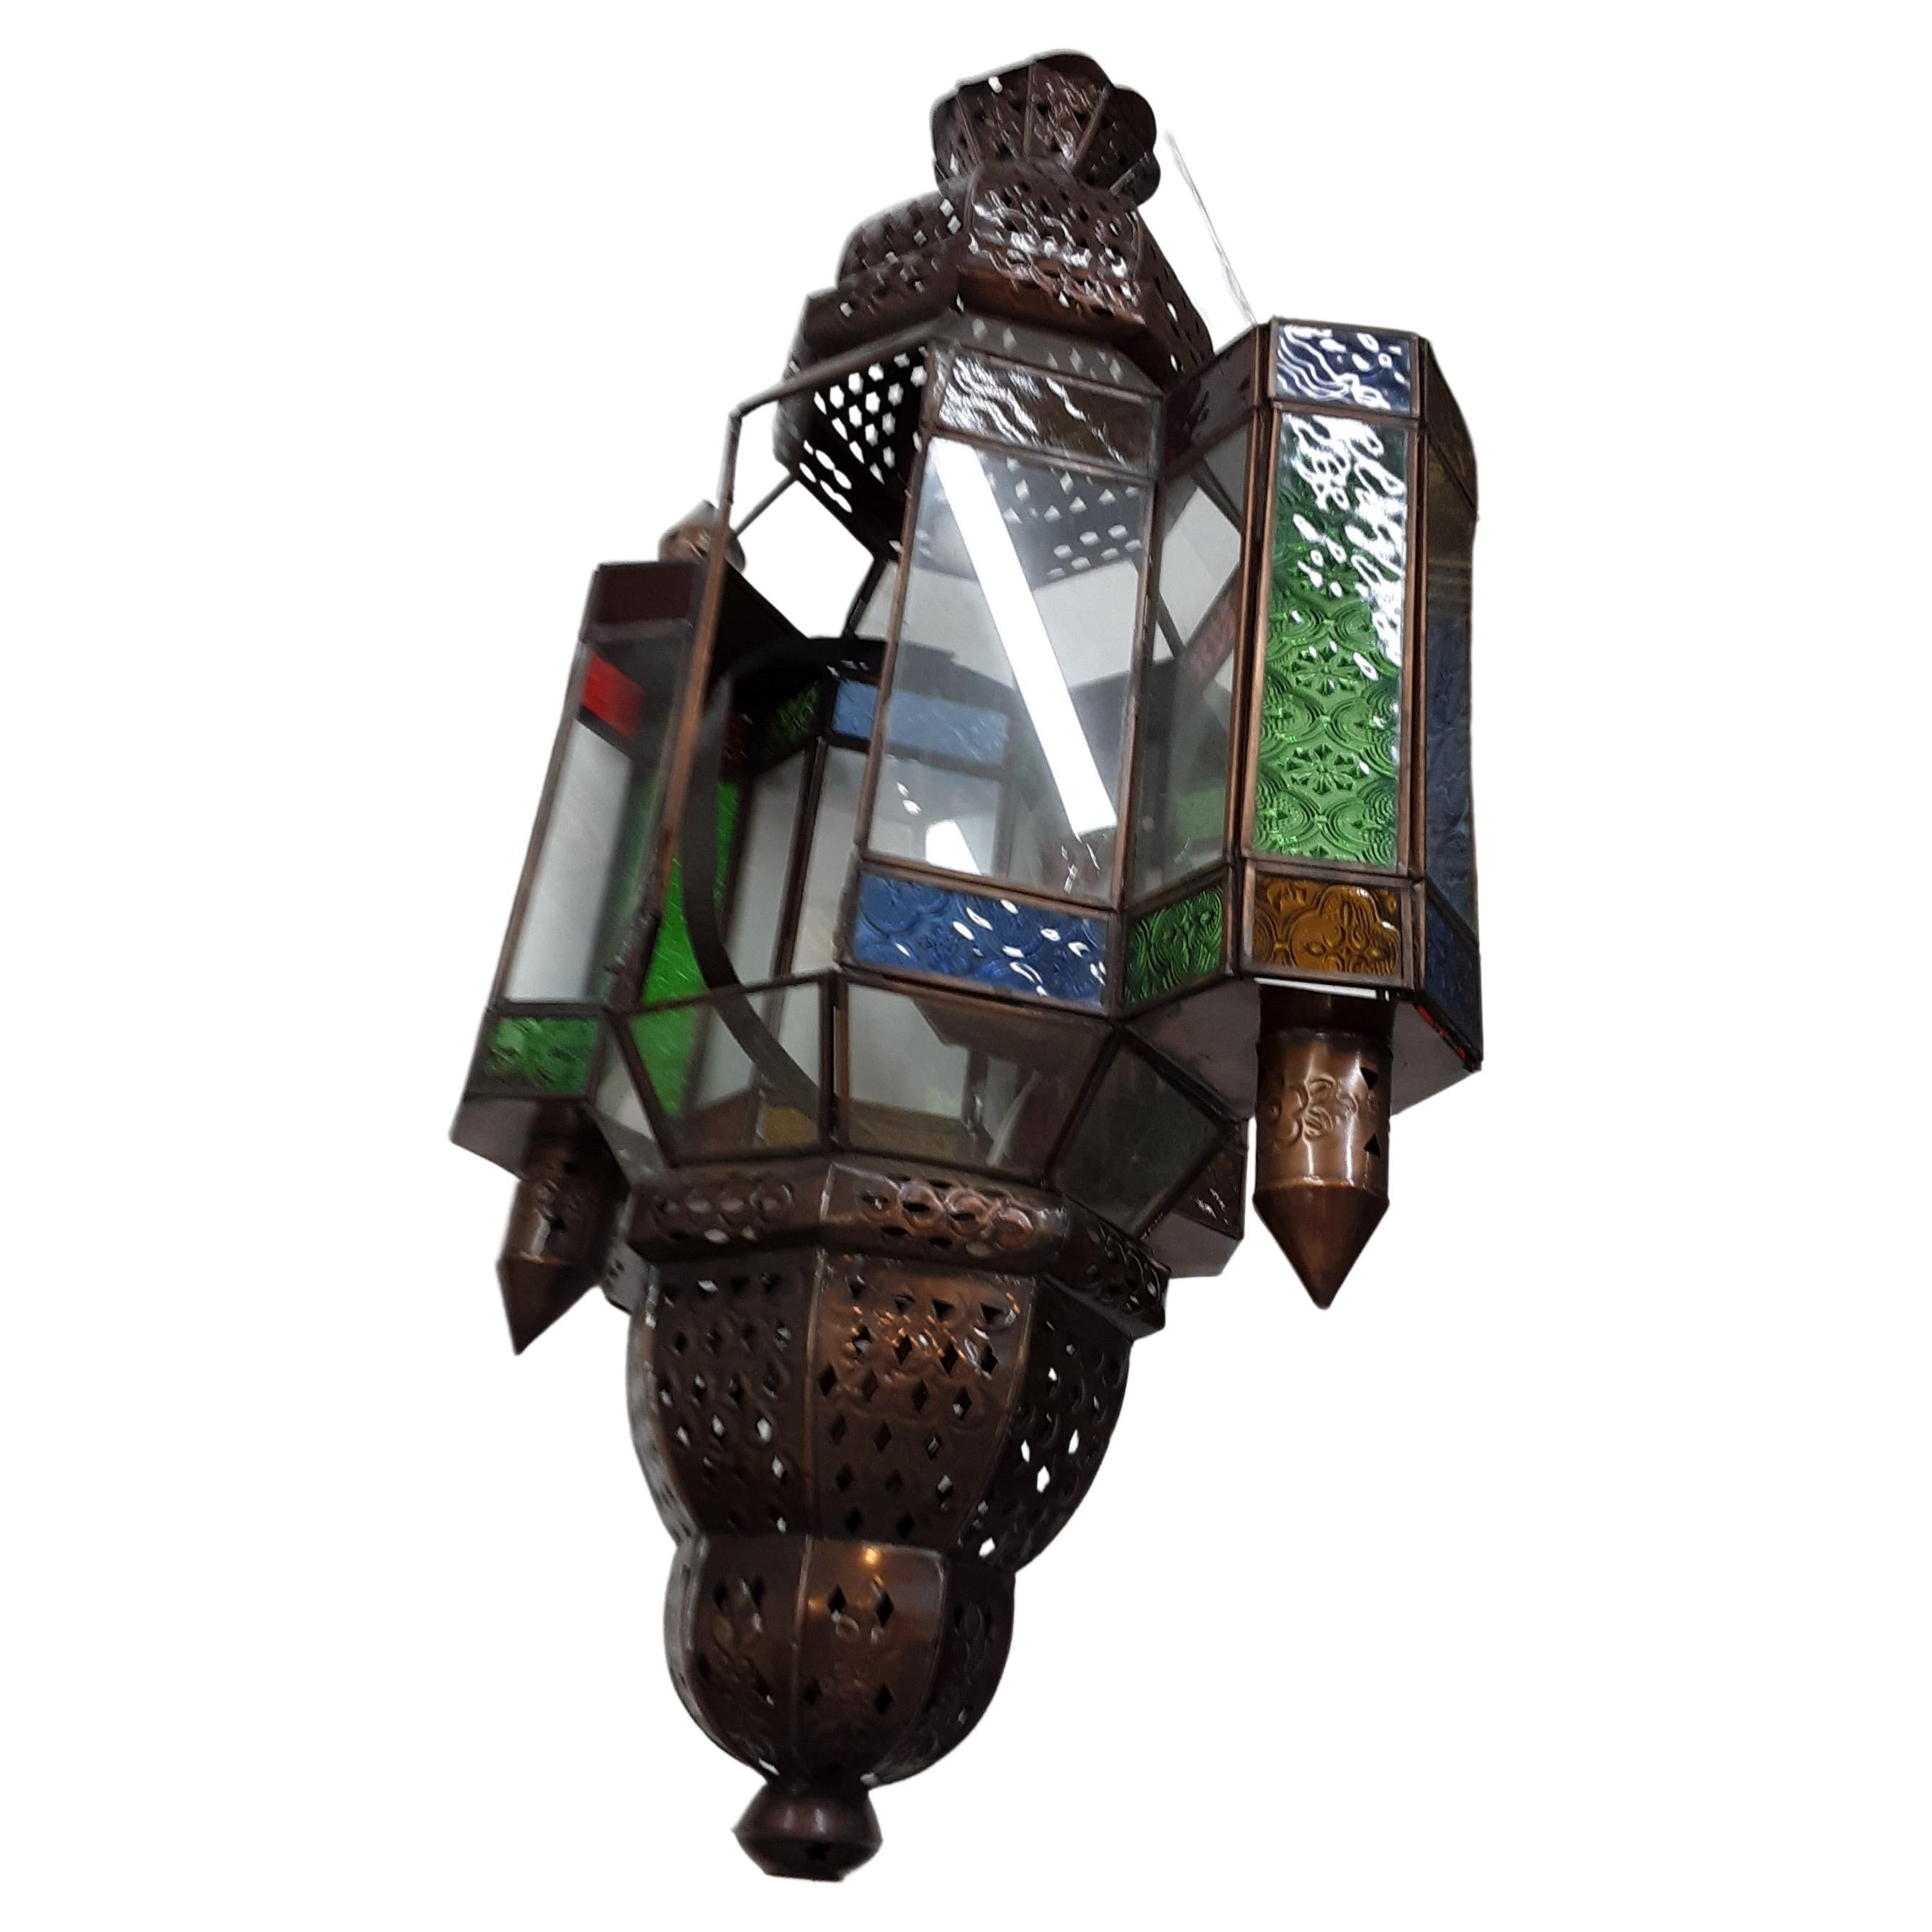 This is a vintage Moroccan art glass lamp set, the way it used to be made. The lamps were retrofitted with electric wiring. This is a true decorators piece.